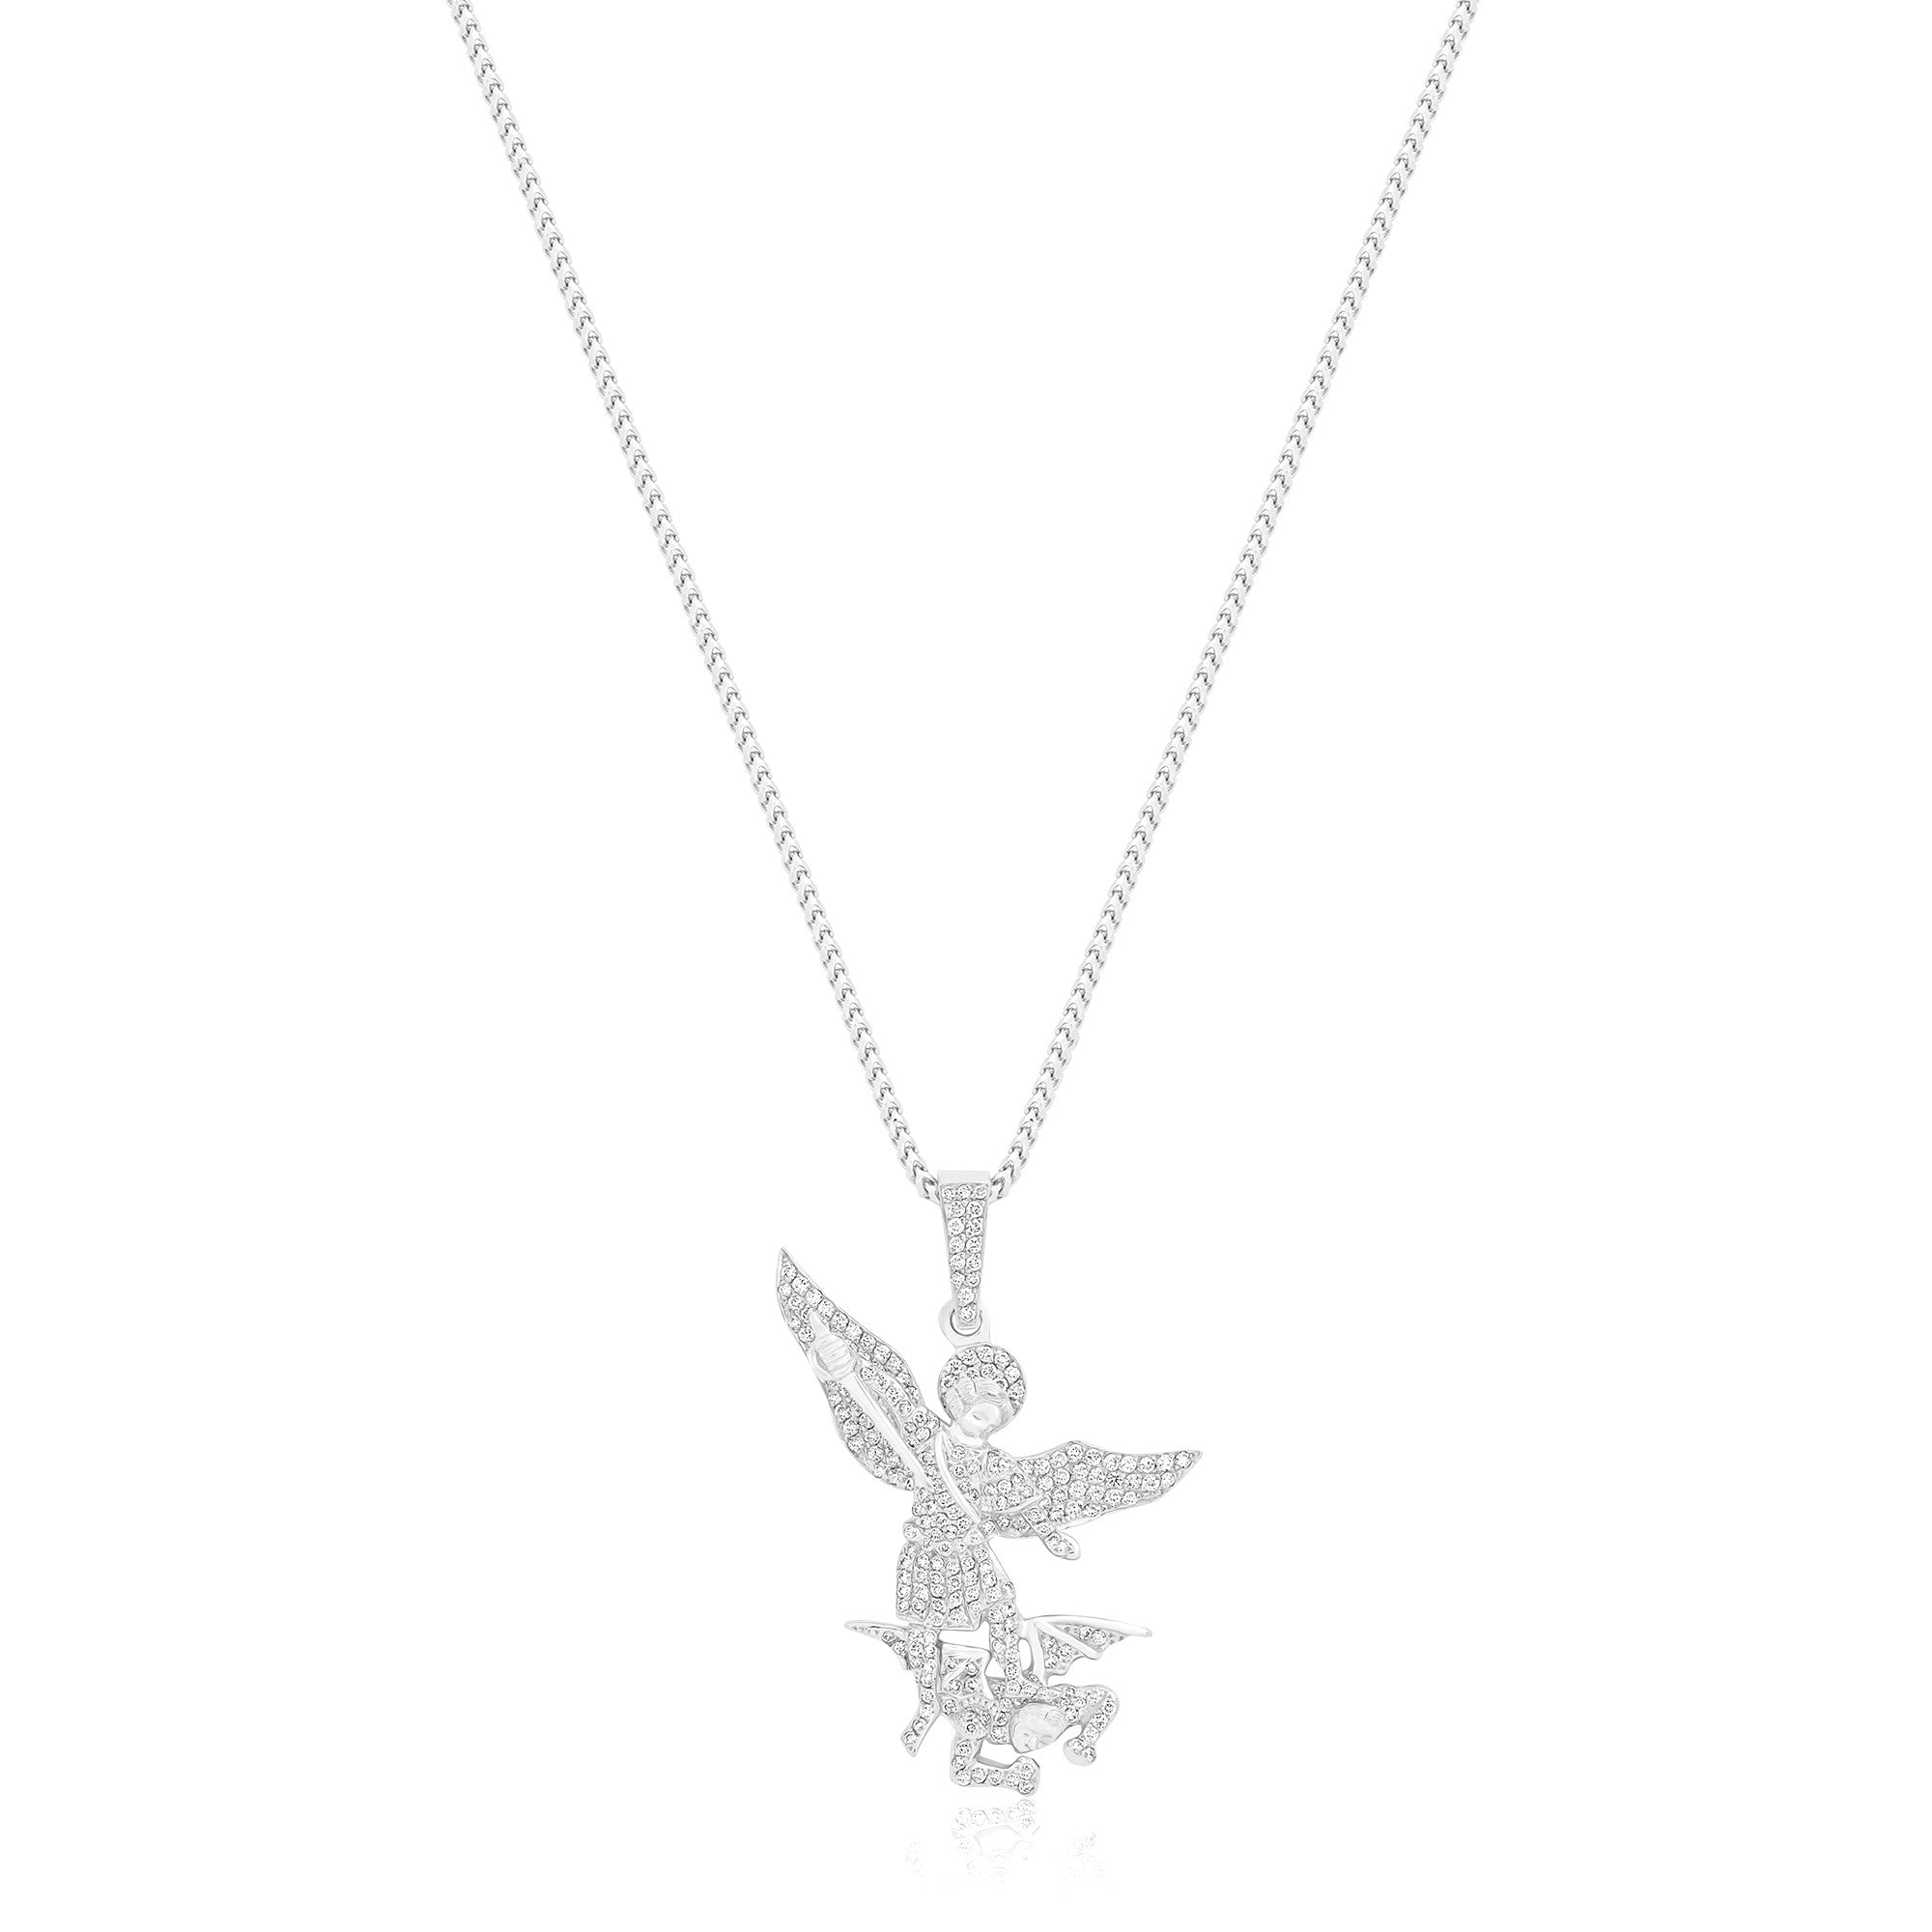 Micro Saint Michael Arch Angel Piece (Fully Iced) (14K WHITE GOLD) - IF & Co. Custom Jewelers